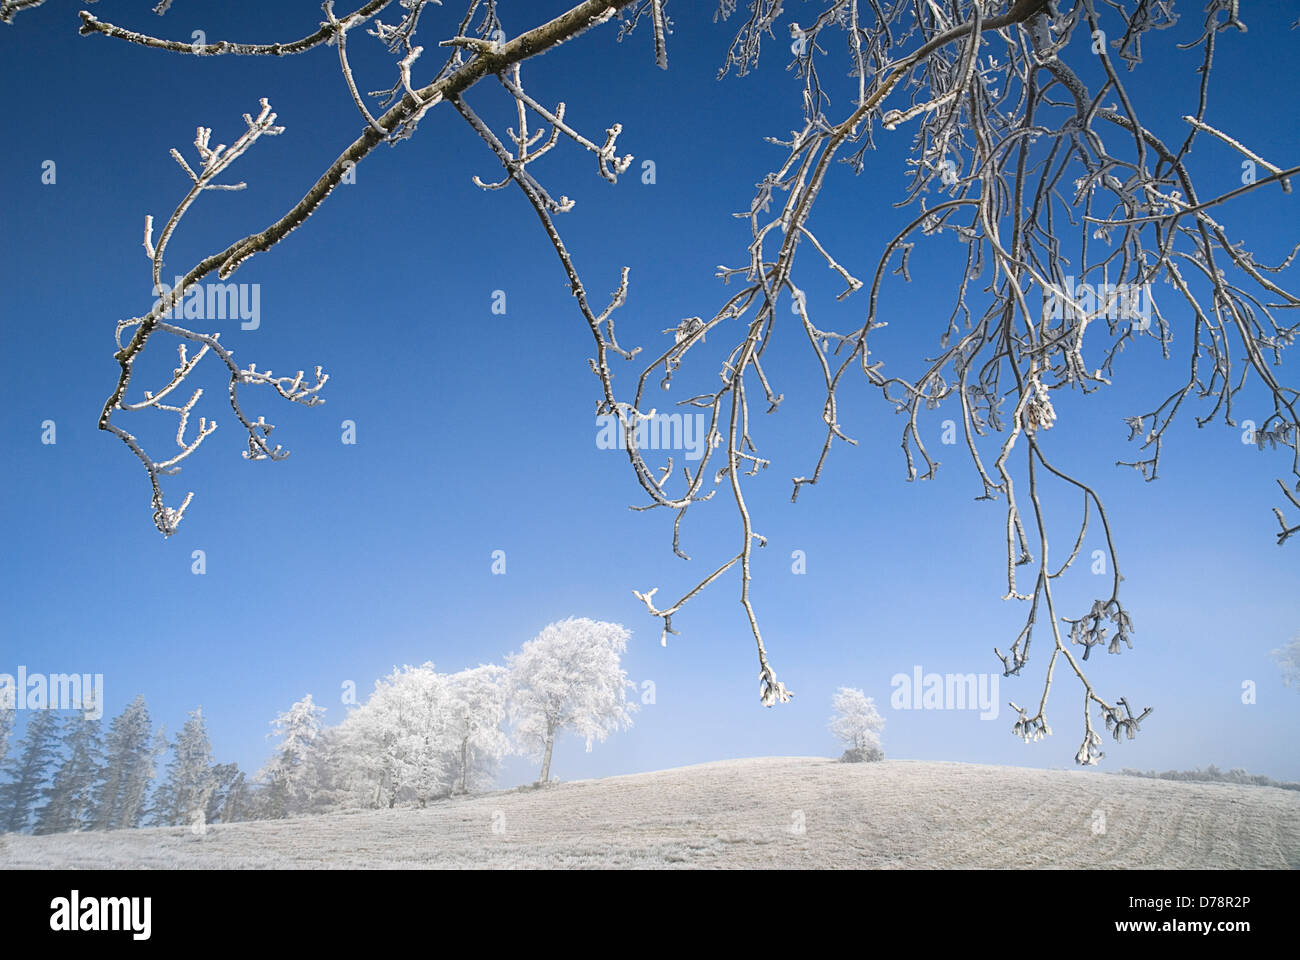 Ireland, County Monaghan, Tullyard, Trees in winter on crest of hill covered in hoar frost on outskirts of Monaghan town. Stock Photo